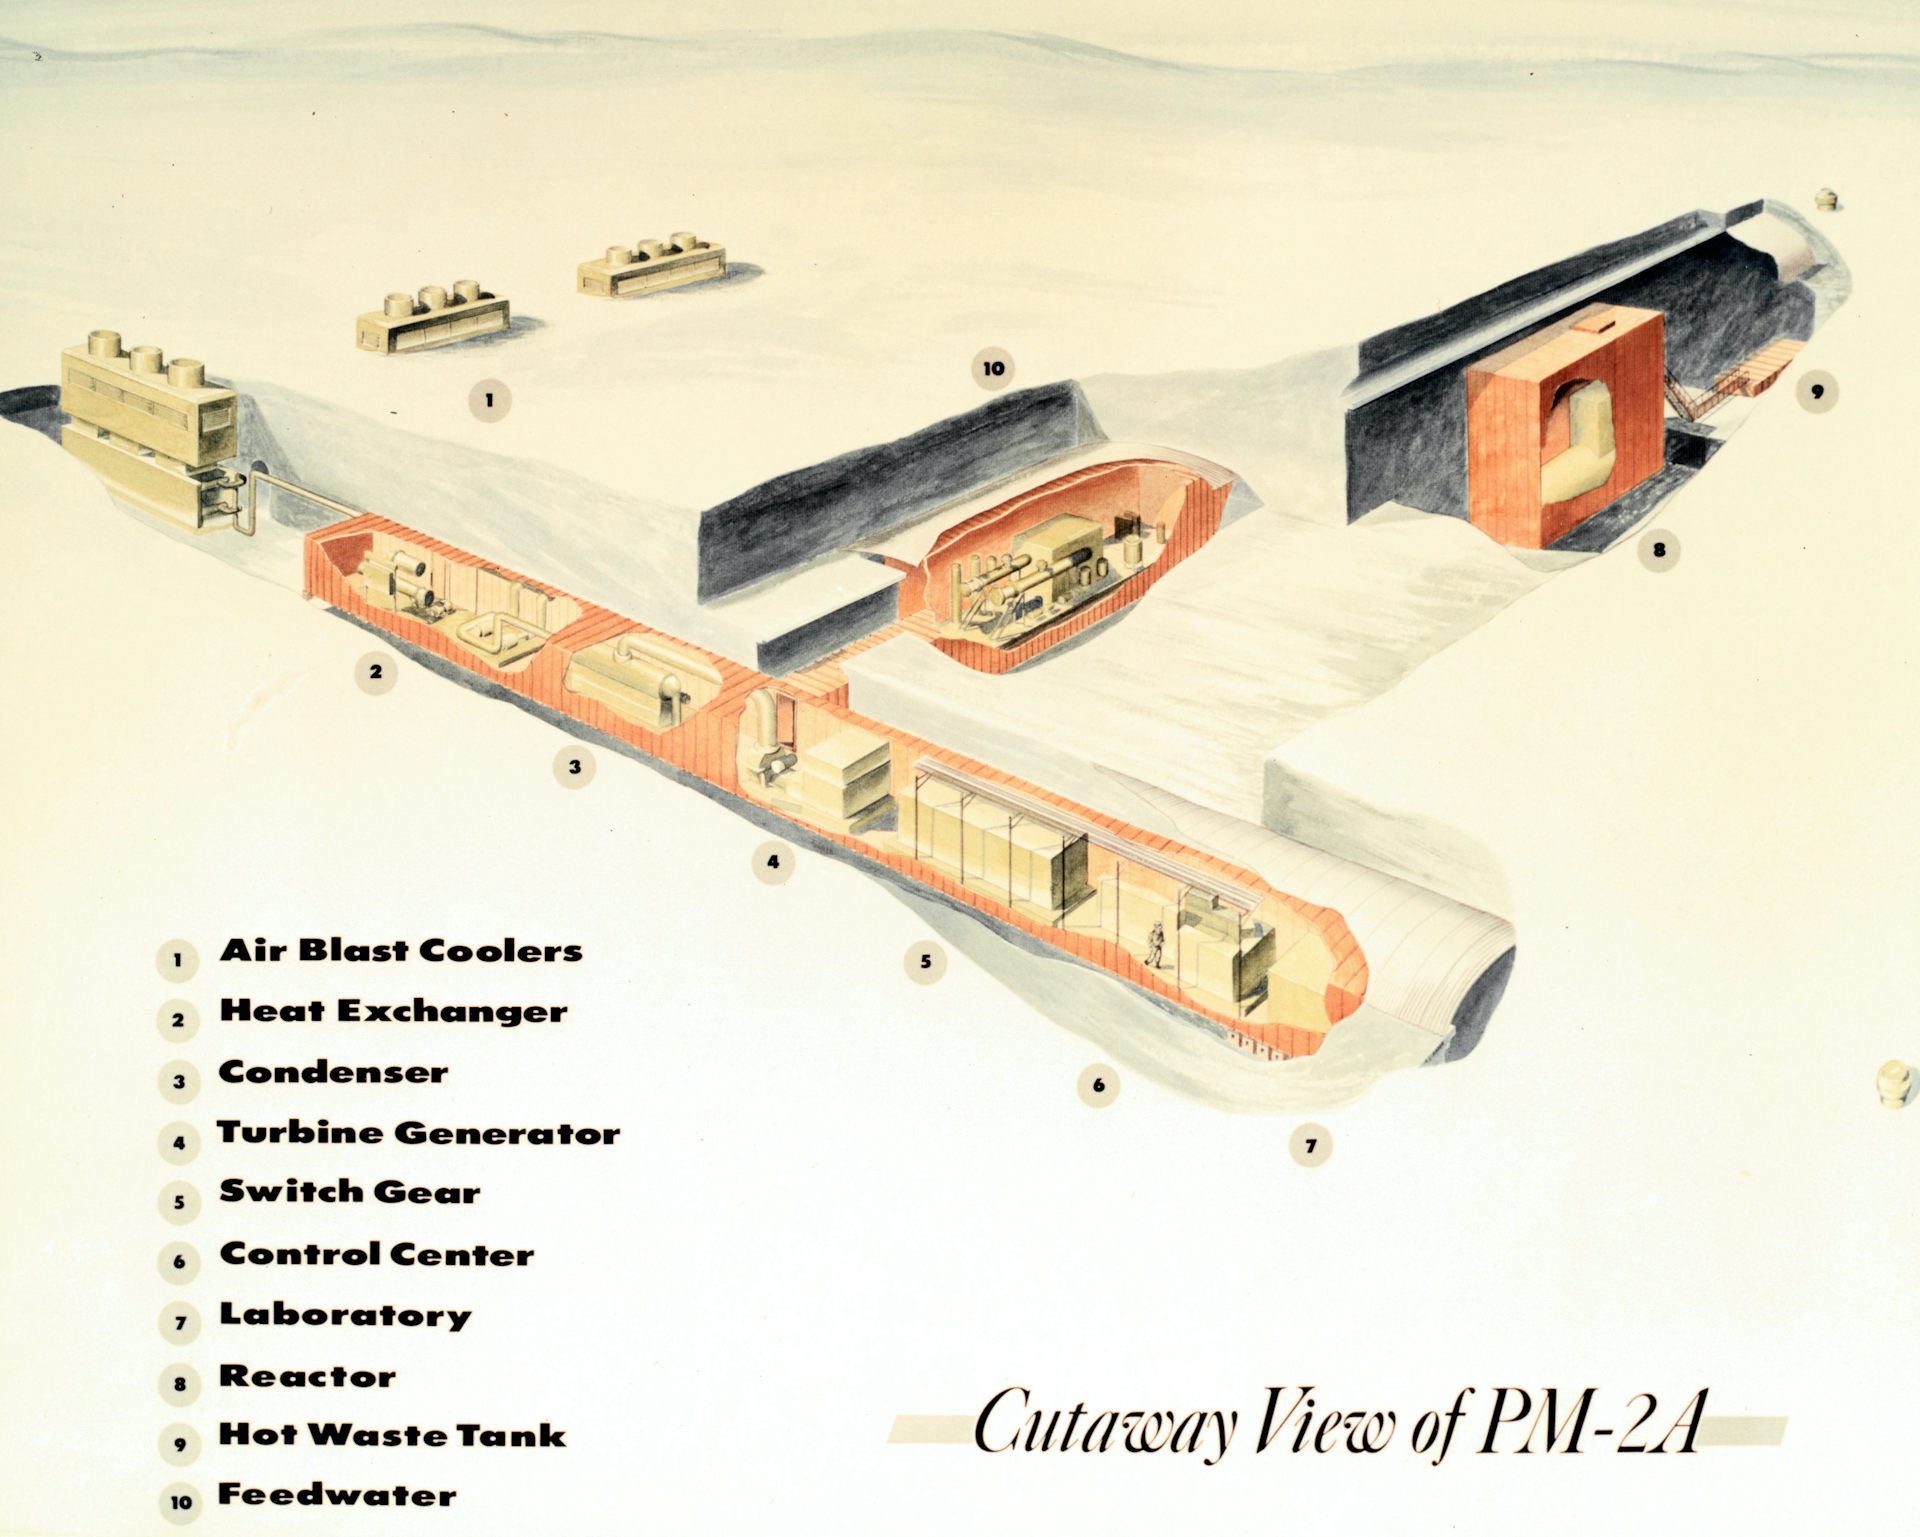 Diagram of Camp Century reactor in Greenland ice trenches